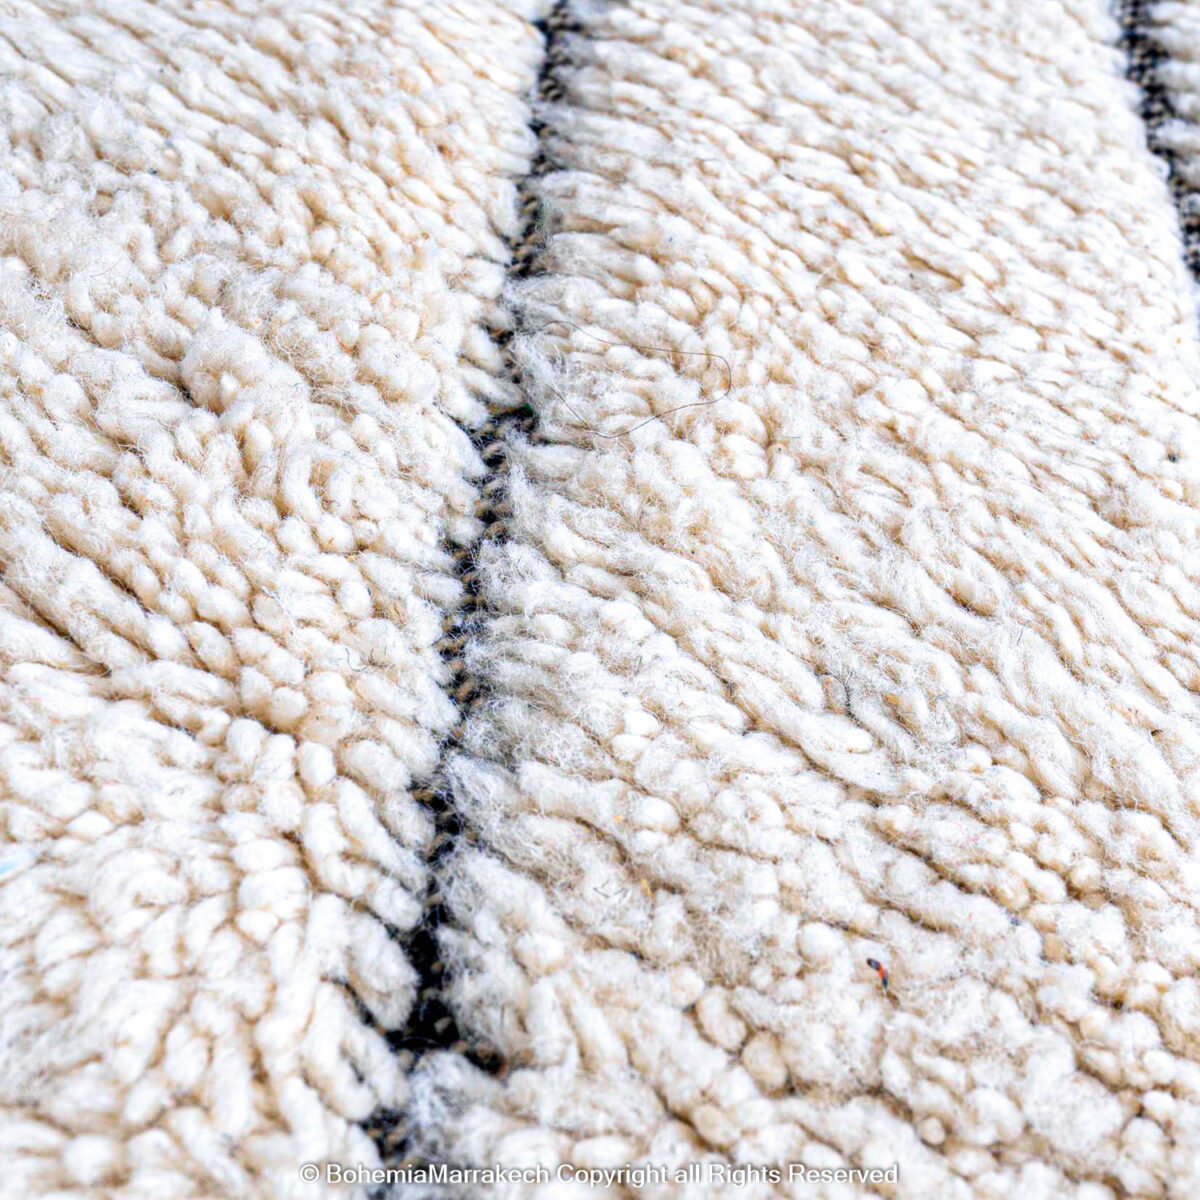 washable rugs, rugs that are washable, washable carpet rugs, 8x10 rugs, runner rugs, 8x10 area rugs, washable area rugs, washable floor rugs, area rugs that are washable, kids rugs, boho rug, ruggable's, outdoor rugs, ruggable rugs, kitchen rugs, living room rug, rugs in a living room, kitchen with rug, rug sizes, carpet sizes, rug dimensions, rug measurements, carpet rug sizes, indoor outdoor rugs, outdoor patio rugs, outdoor rugs for porch, indoor and outdoor rugs, washable accent rugs, porch rugs outdoor, exterior patio rugs, kitchen runner rugs, kitchen rugs and runners, area rug for living room, kitchen carpet runner, large room rug, carpet runner in kitchen, kitchen with runner rug, patio rugs, children's rugs, rug patio, machine washable rugs, washable runner rugs, kitchen runner, machine washable area rugs, runner washable rugs, washable carpet runners, machine washable carpet, washable rugs and runners, machine washable floor rugs, rugs washable runners.